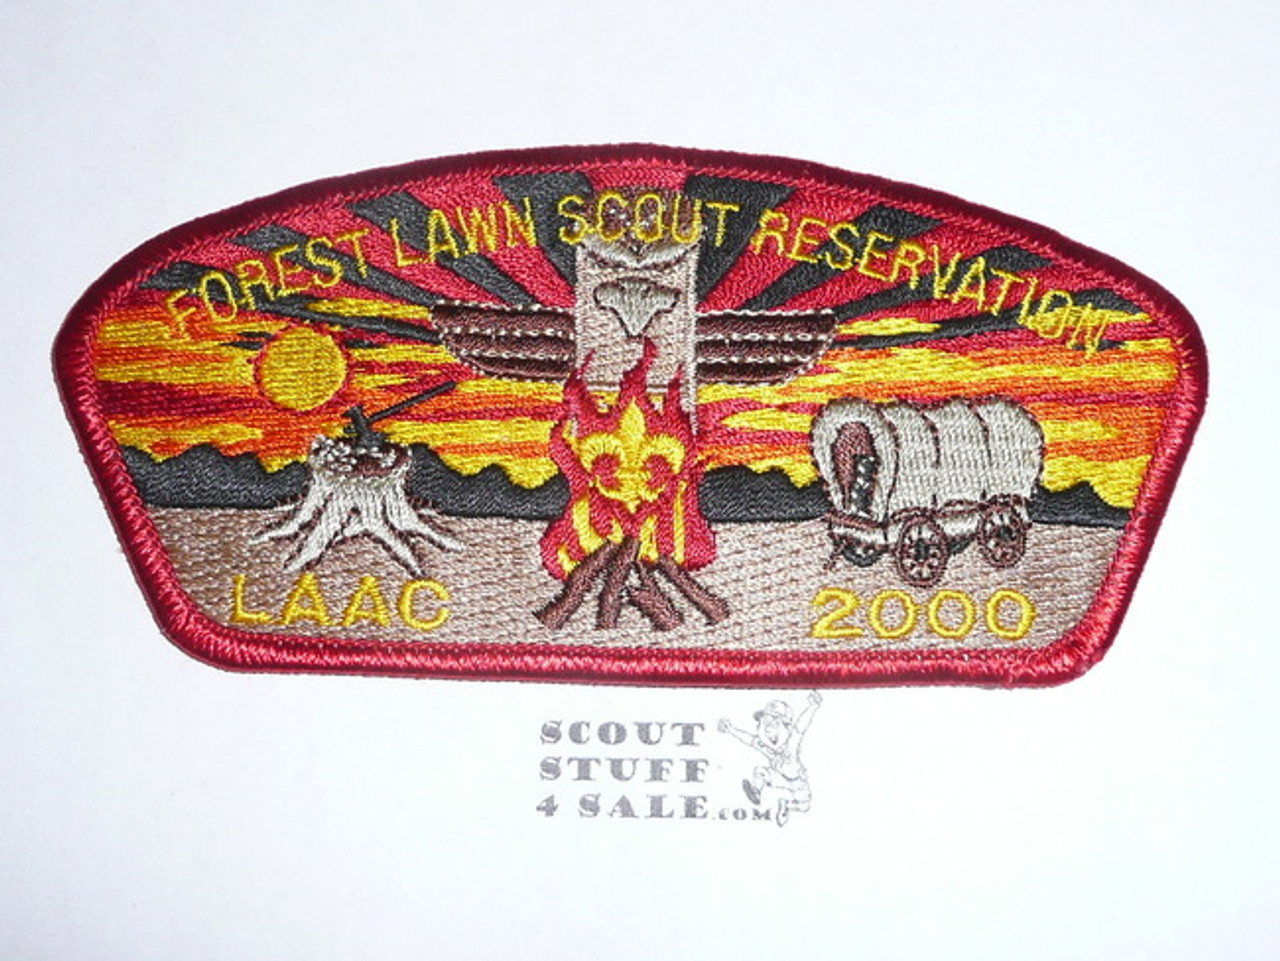 Los Angeles Area Council sa19 - 2000 Forest Lawn Scout Reservation STAFF